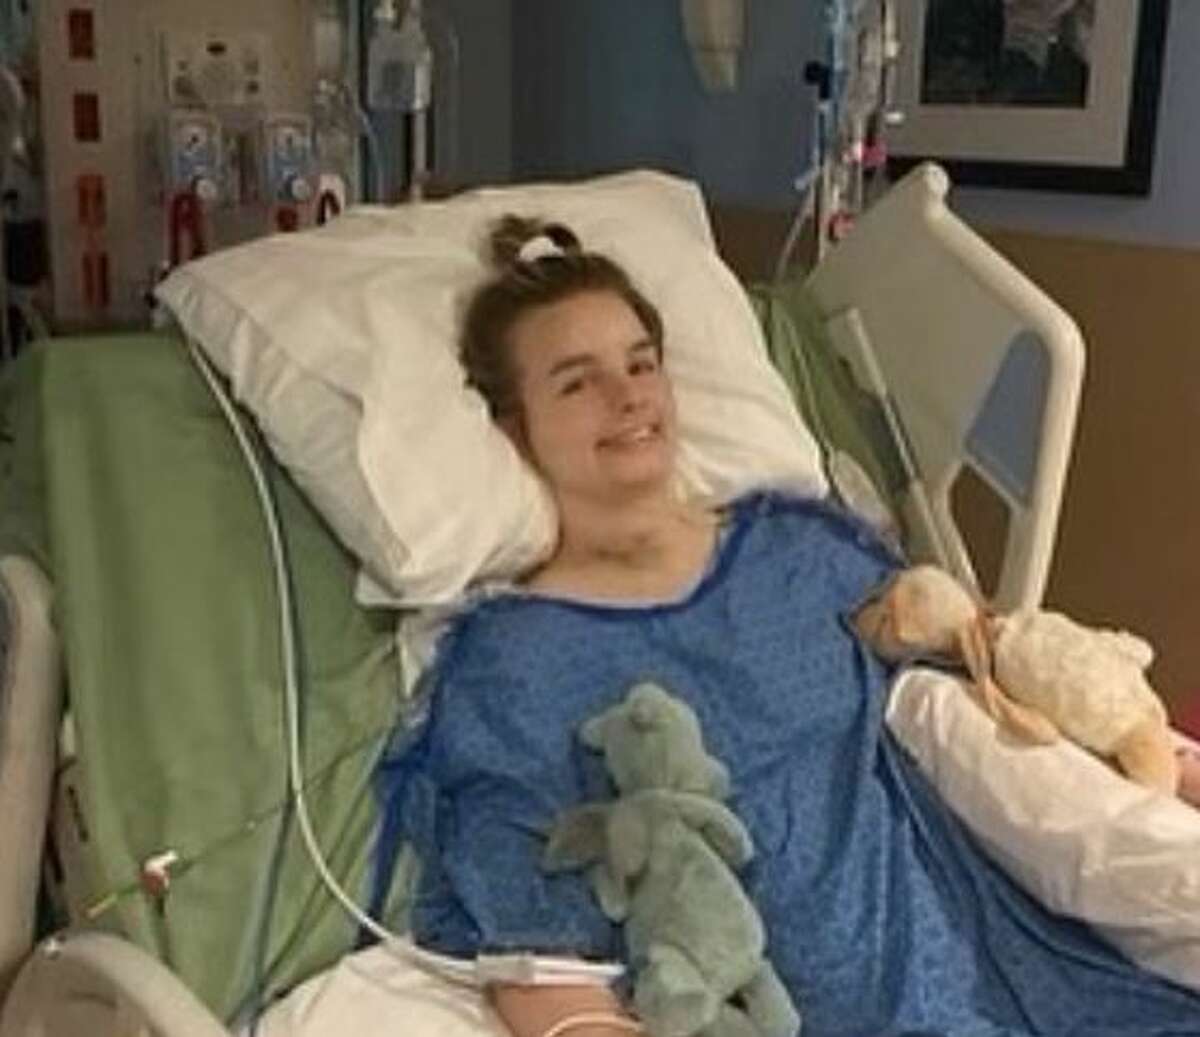 Anna Buhrmann, a field hockey player for Sacred Heart University in Fairfield, is recovering from a Colorado skiing incident that caused a severe spinal injury.